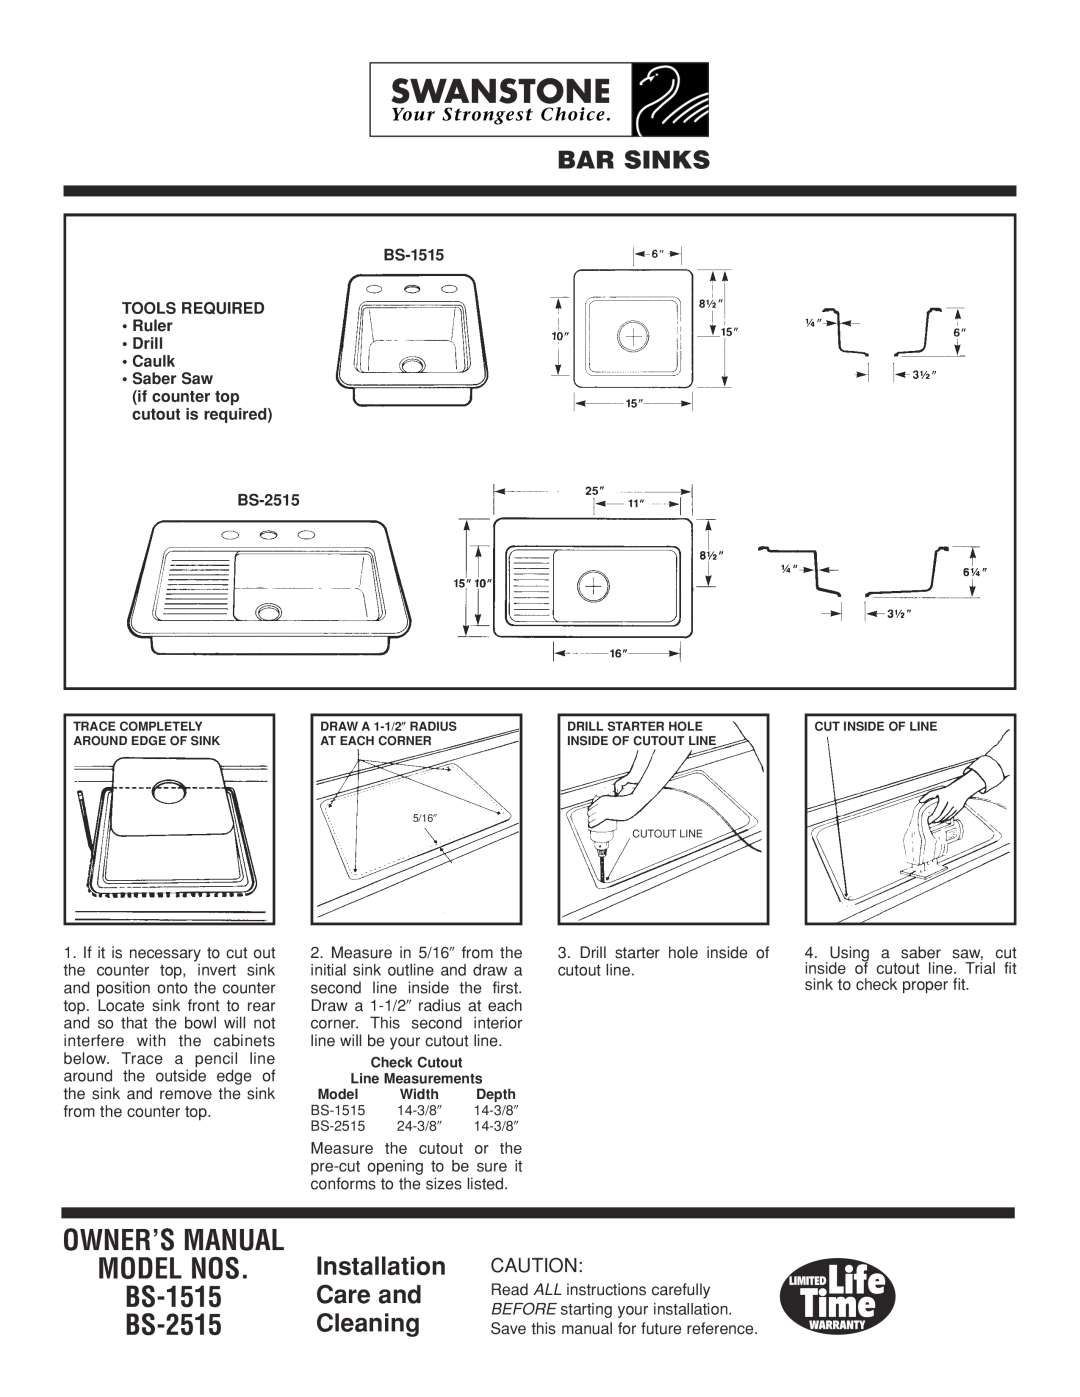 The Swan Corporation owner manual Bar Sinks, Installation Care and Cleaning, MODEL NOS BS-1515 BS-2515 